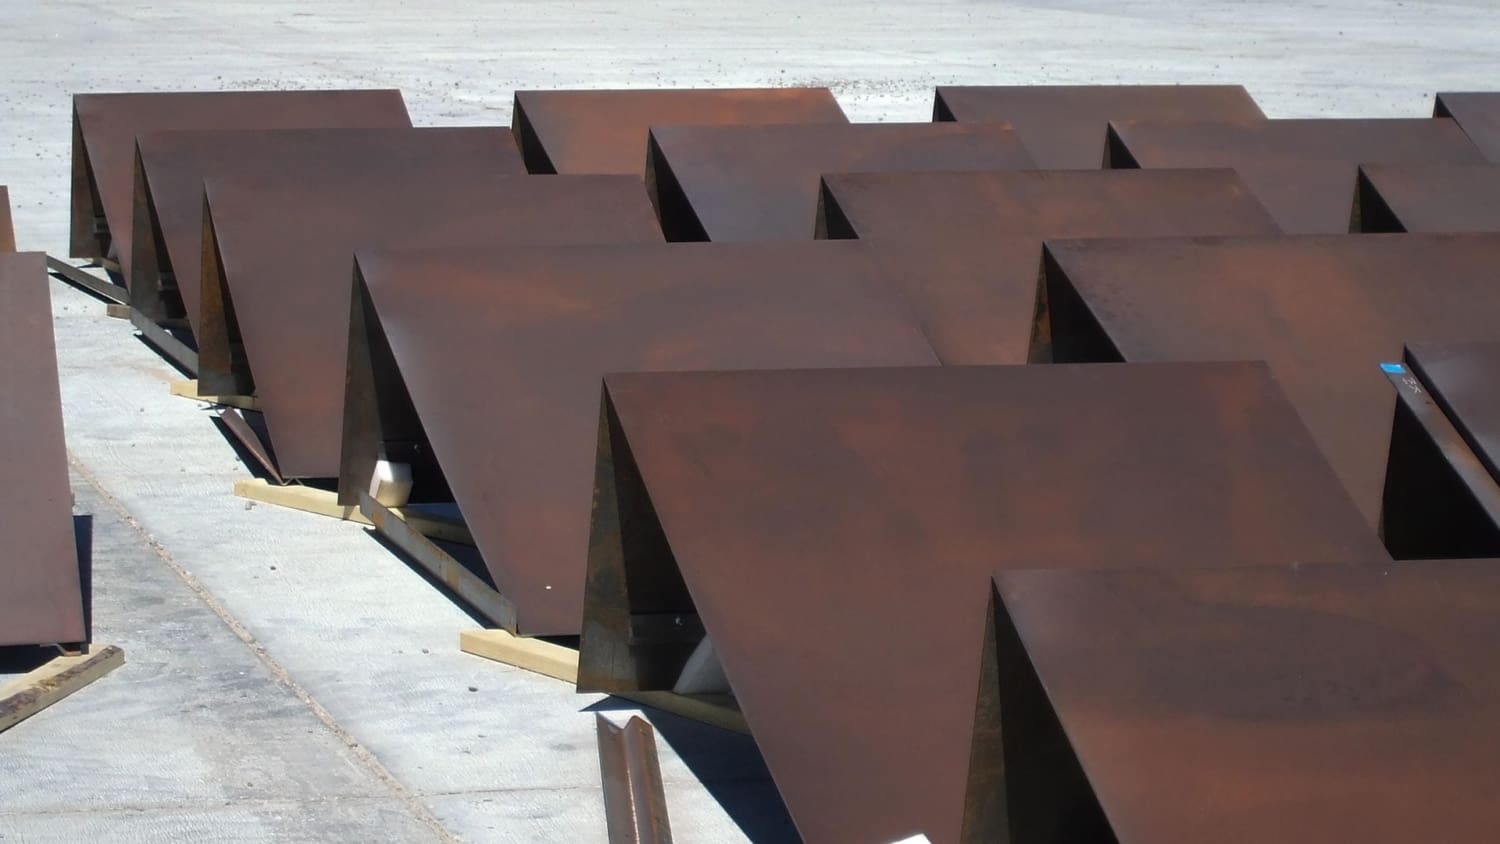 Photograph of the header panels before installation on Spaceport America